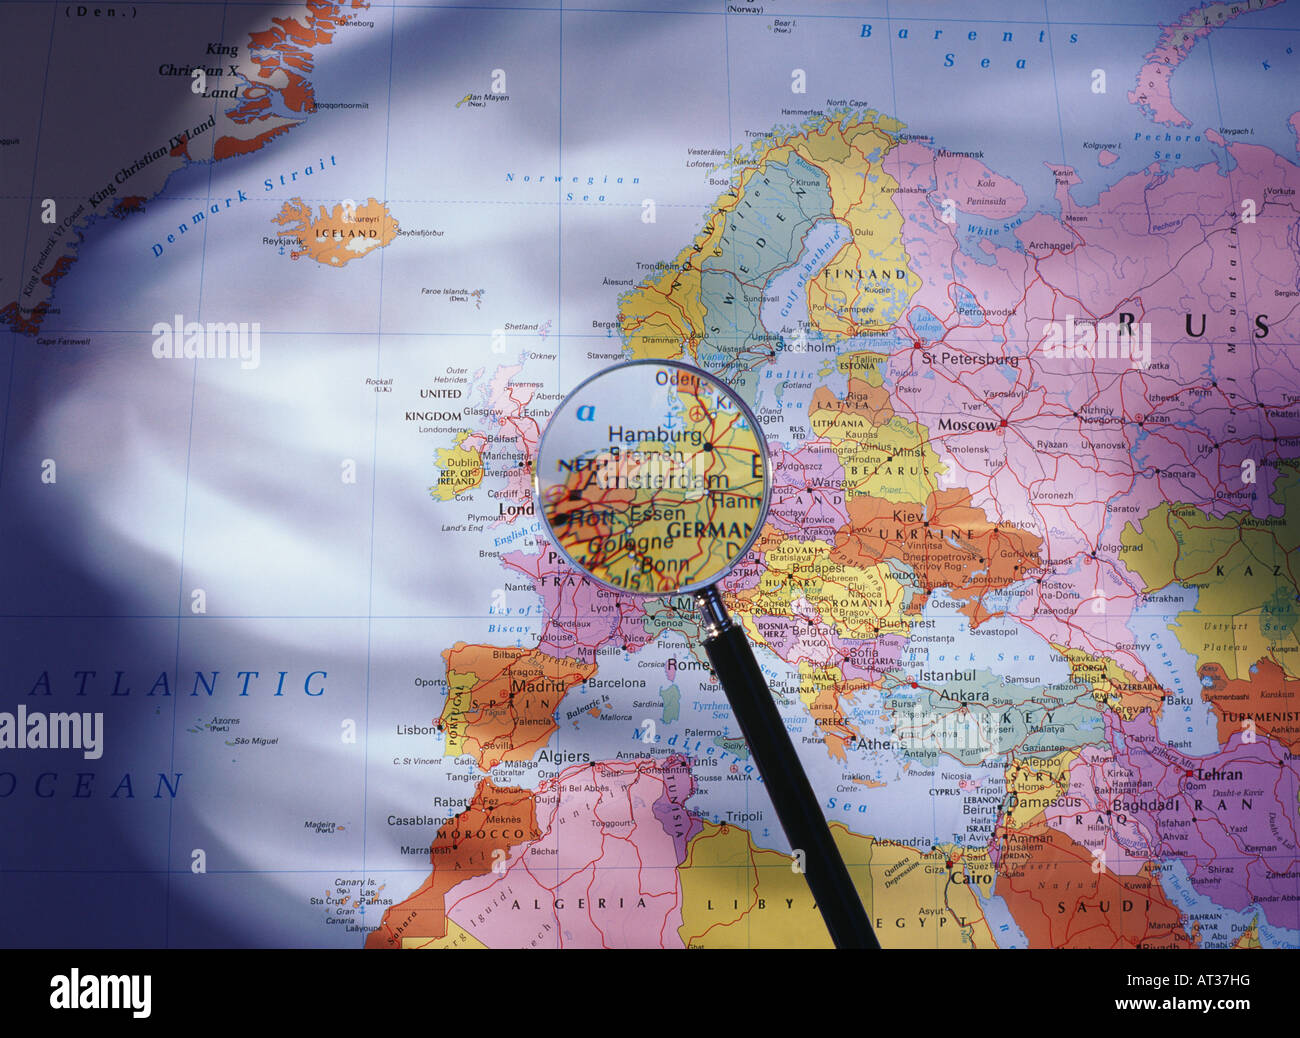 A map of Europe seen through a magnifying glass Stock Photo